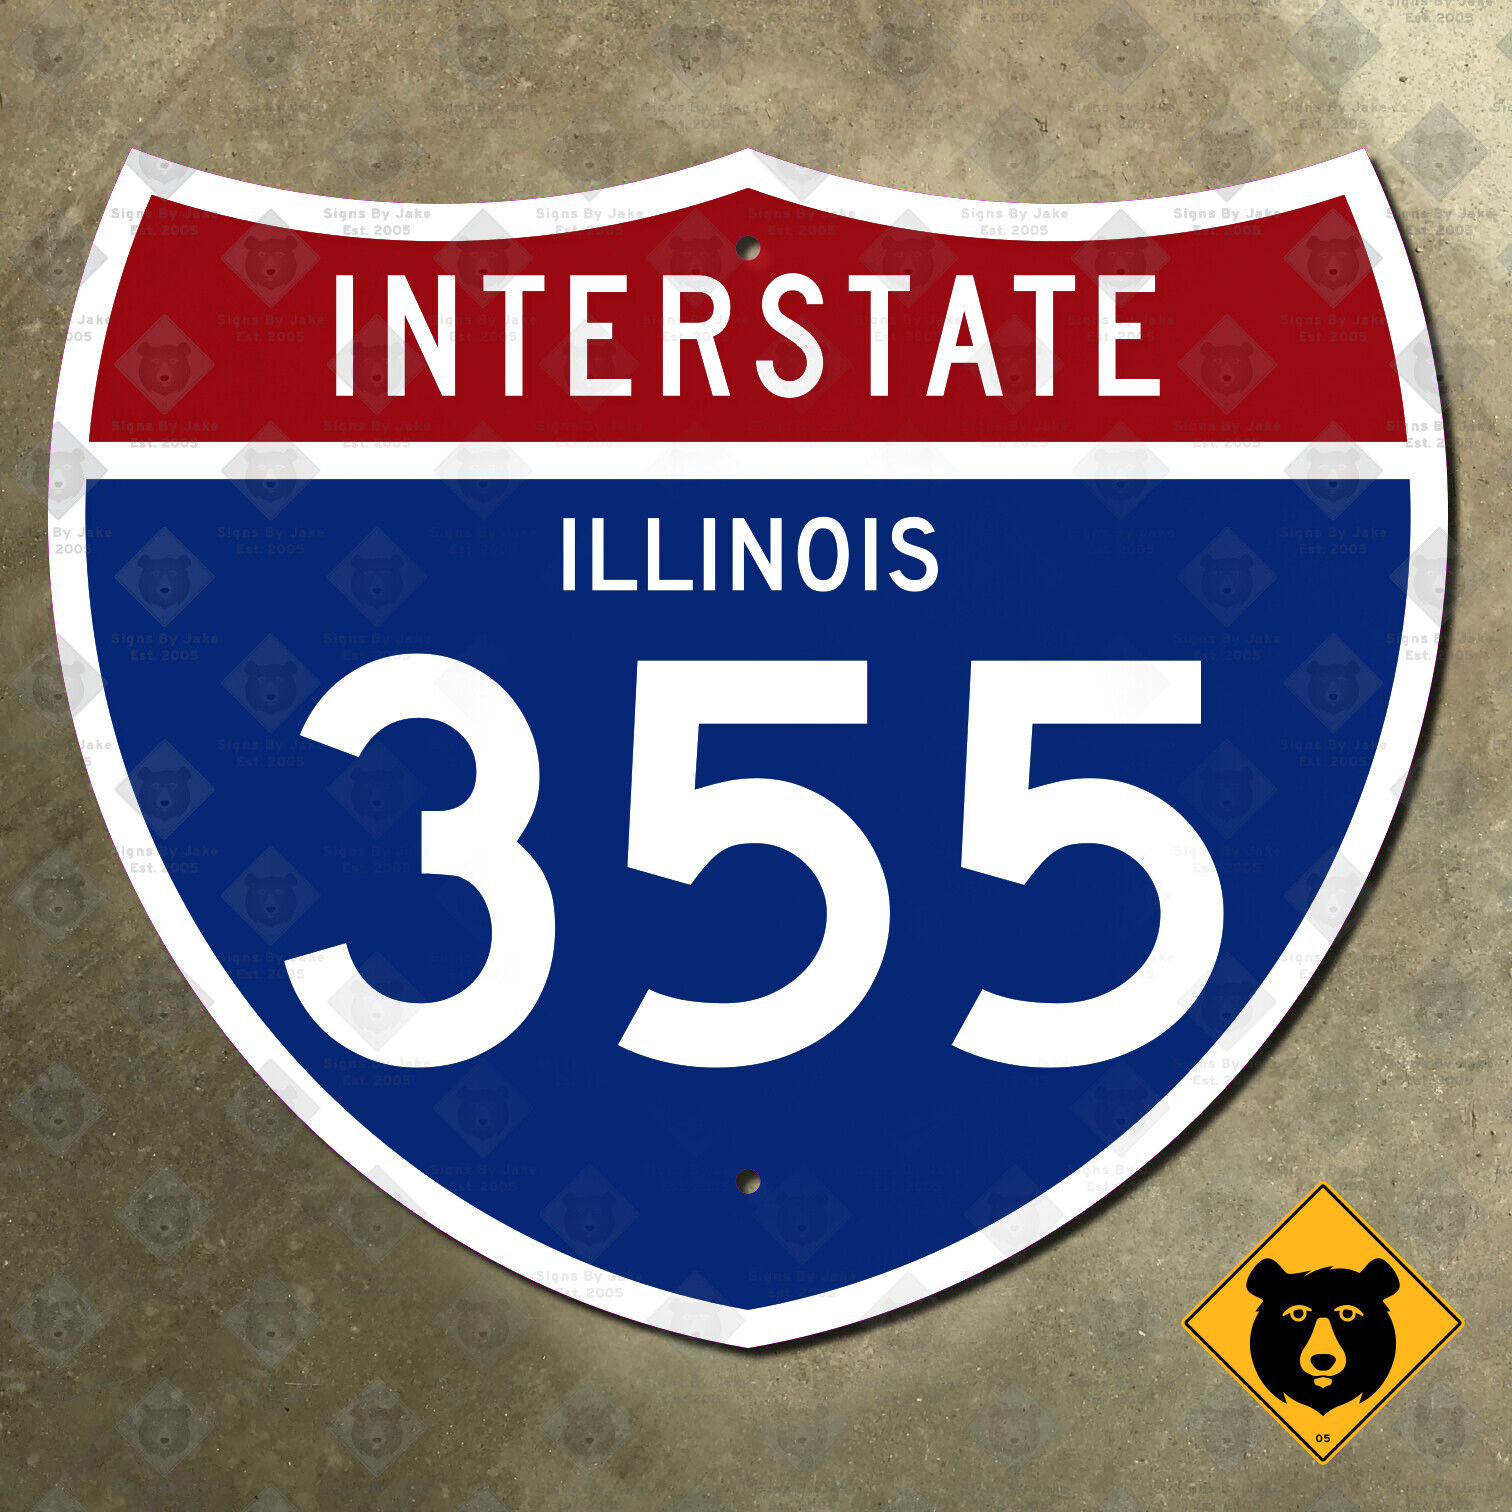 Illinois interstate route 355 highway marker 1961 road sign Chicago metro 21x18